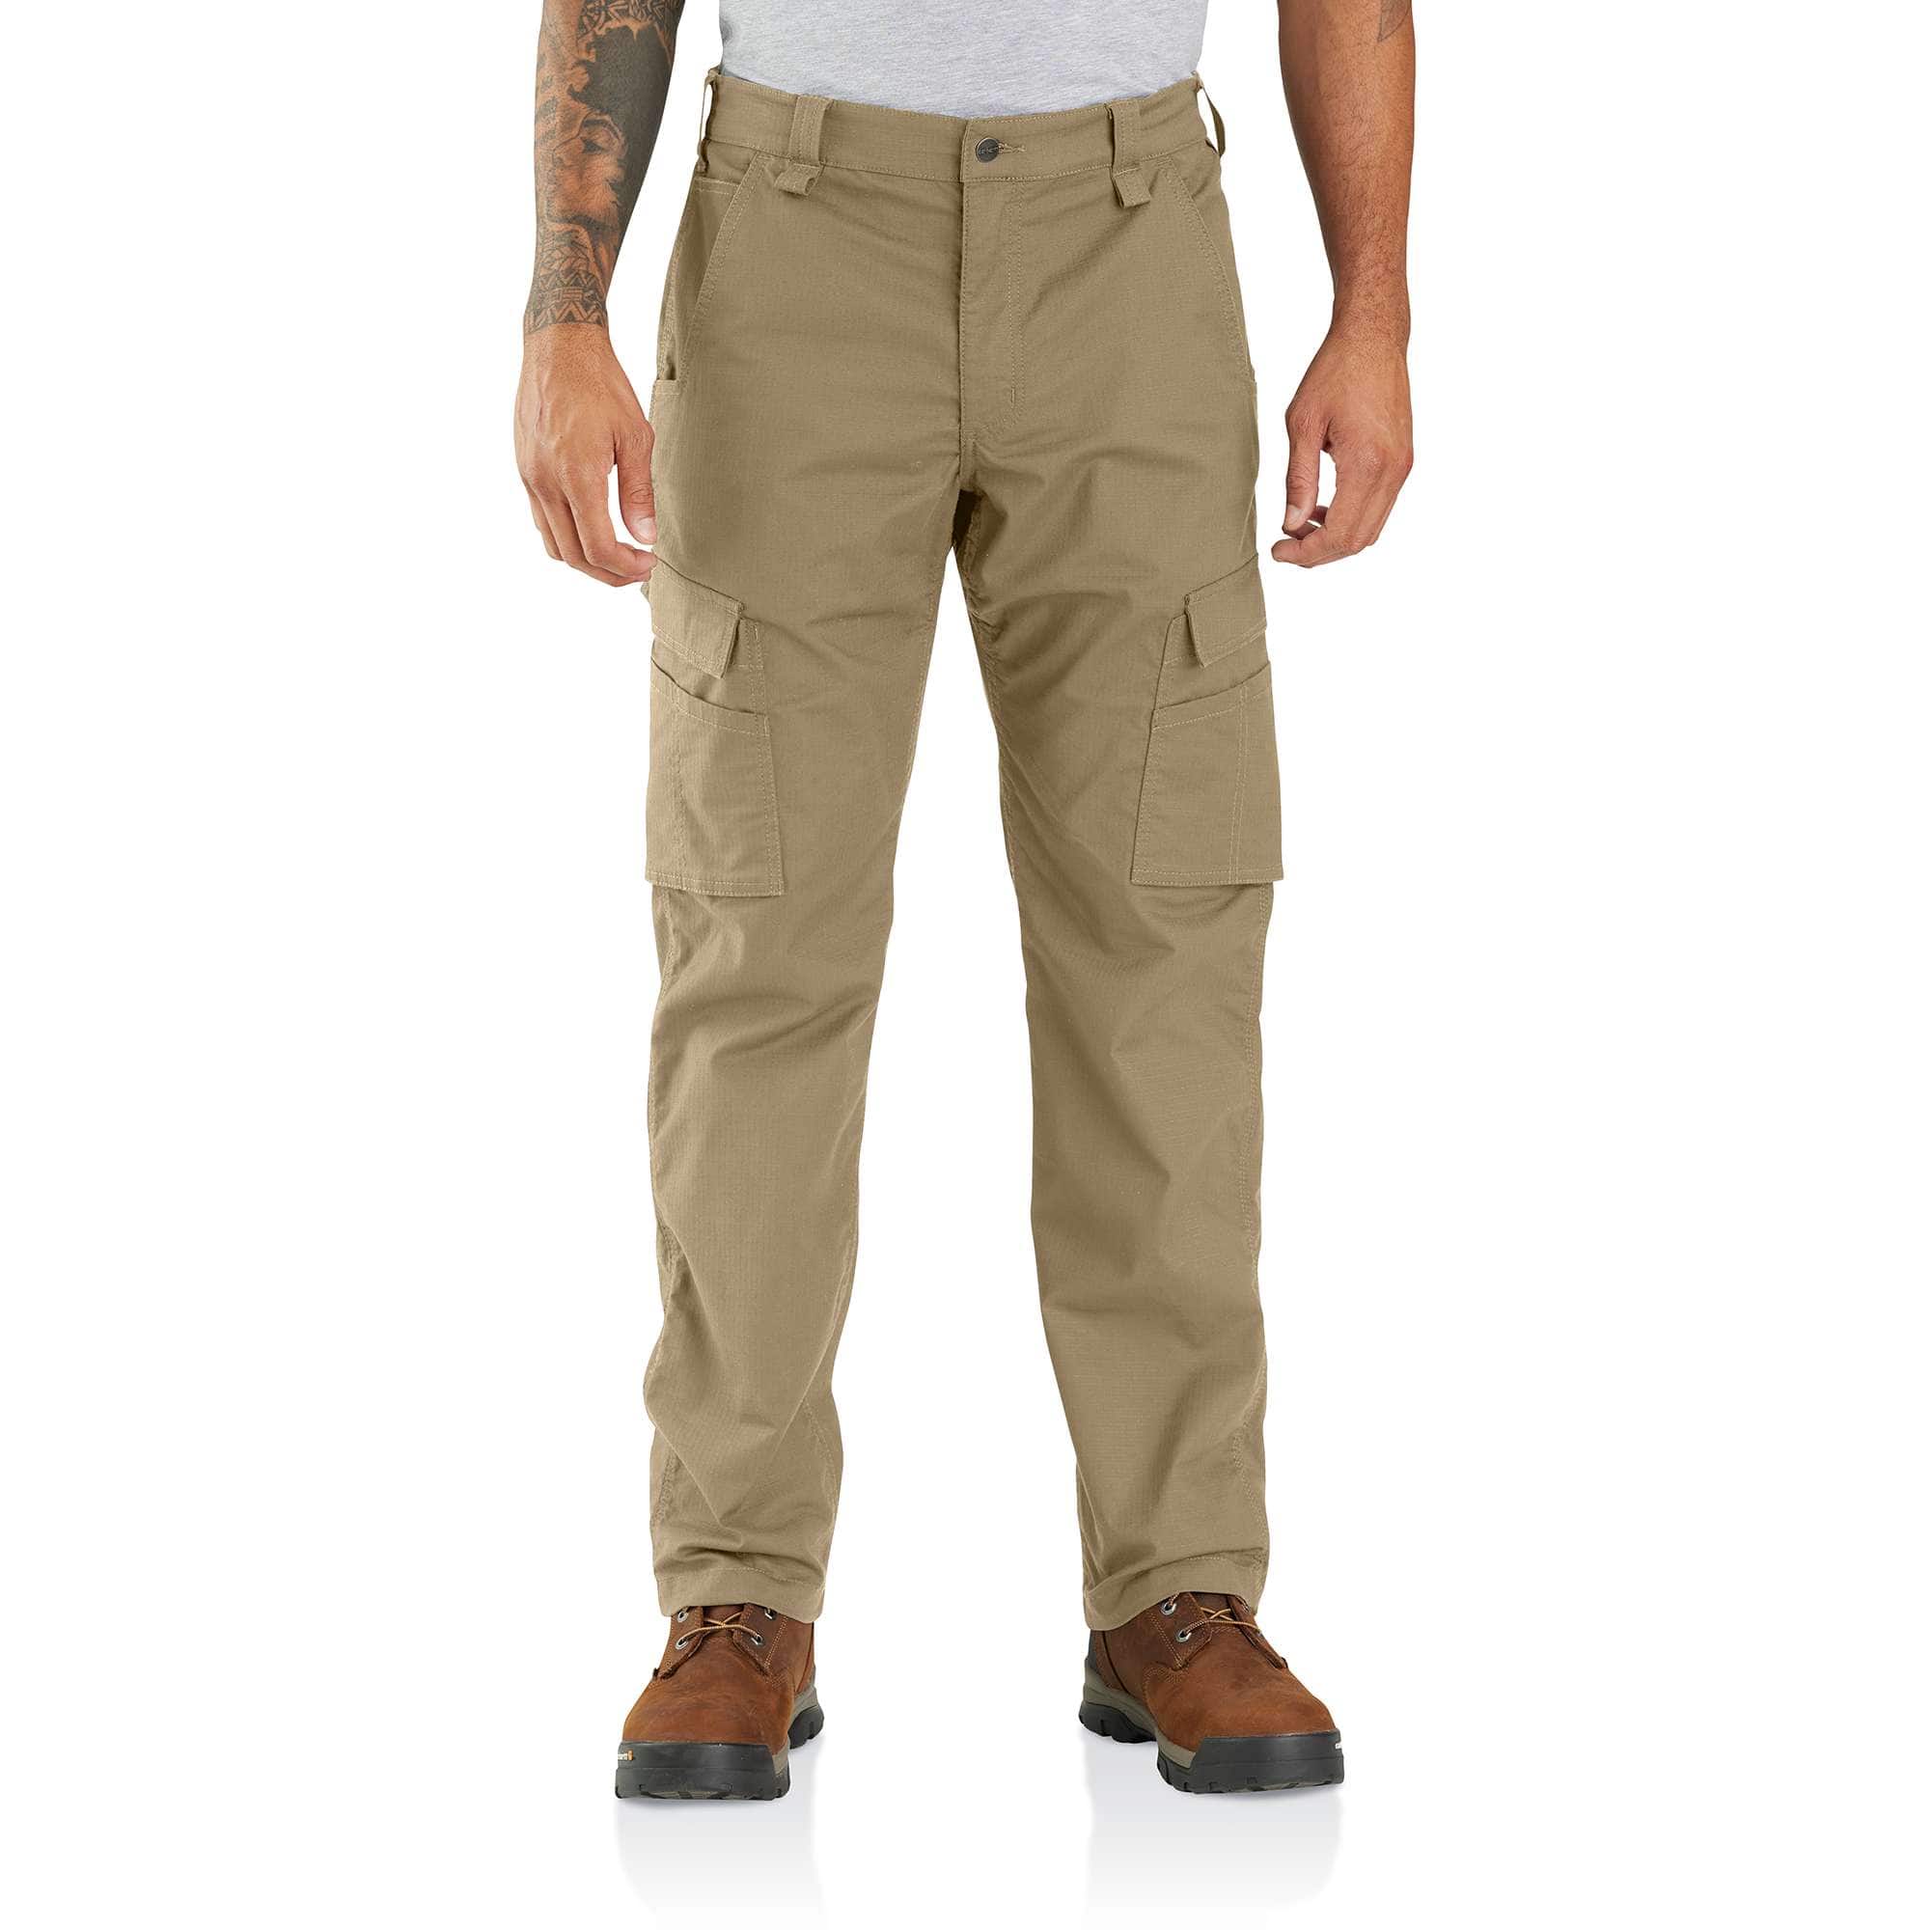 Carhartt Men's Stretch Fit Mid-Rise Force Cargo Work Pants